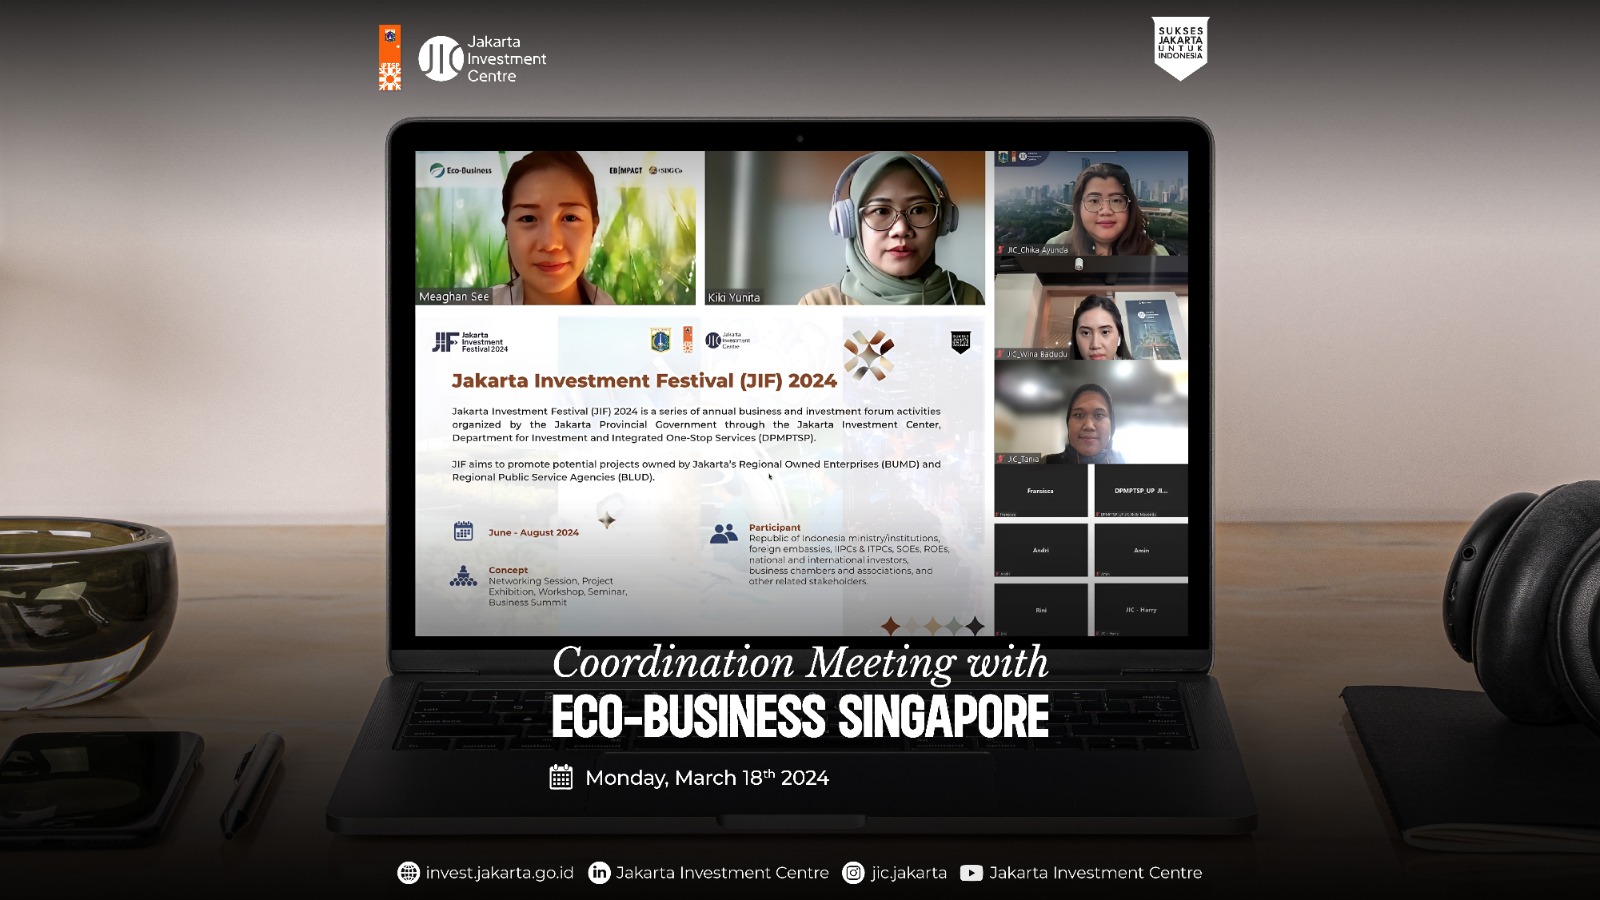 Coordination Meeting with Eco-Business Singapore